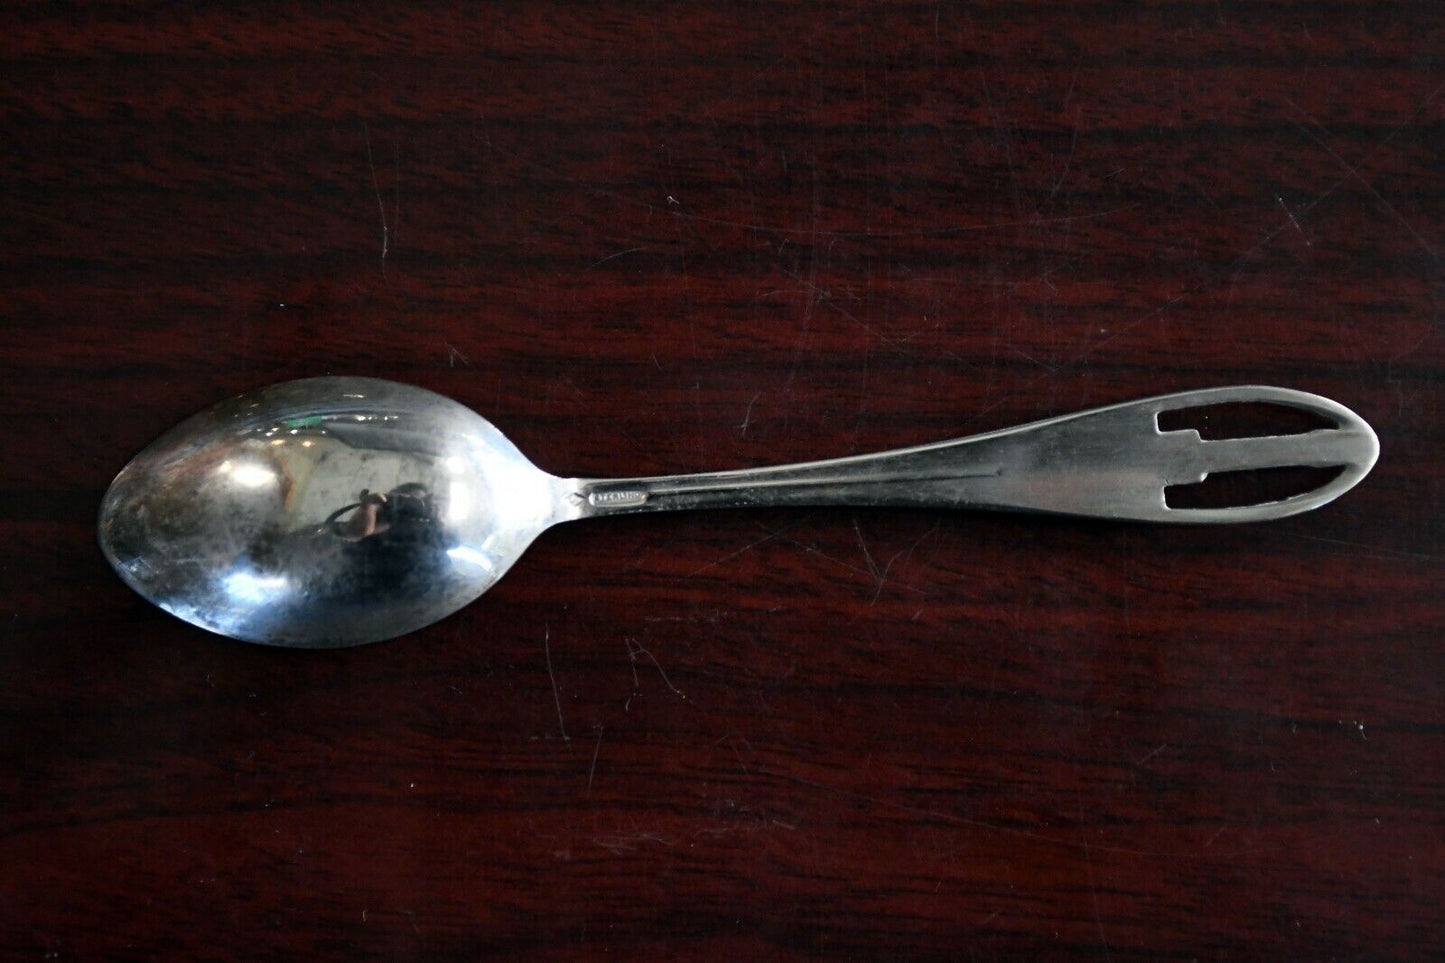 Chicago Illinois Sterling Silver .33 oz. Souvenir Spoon 4 1/4" Water Tower